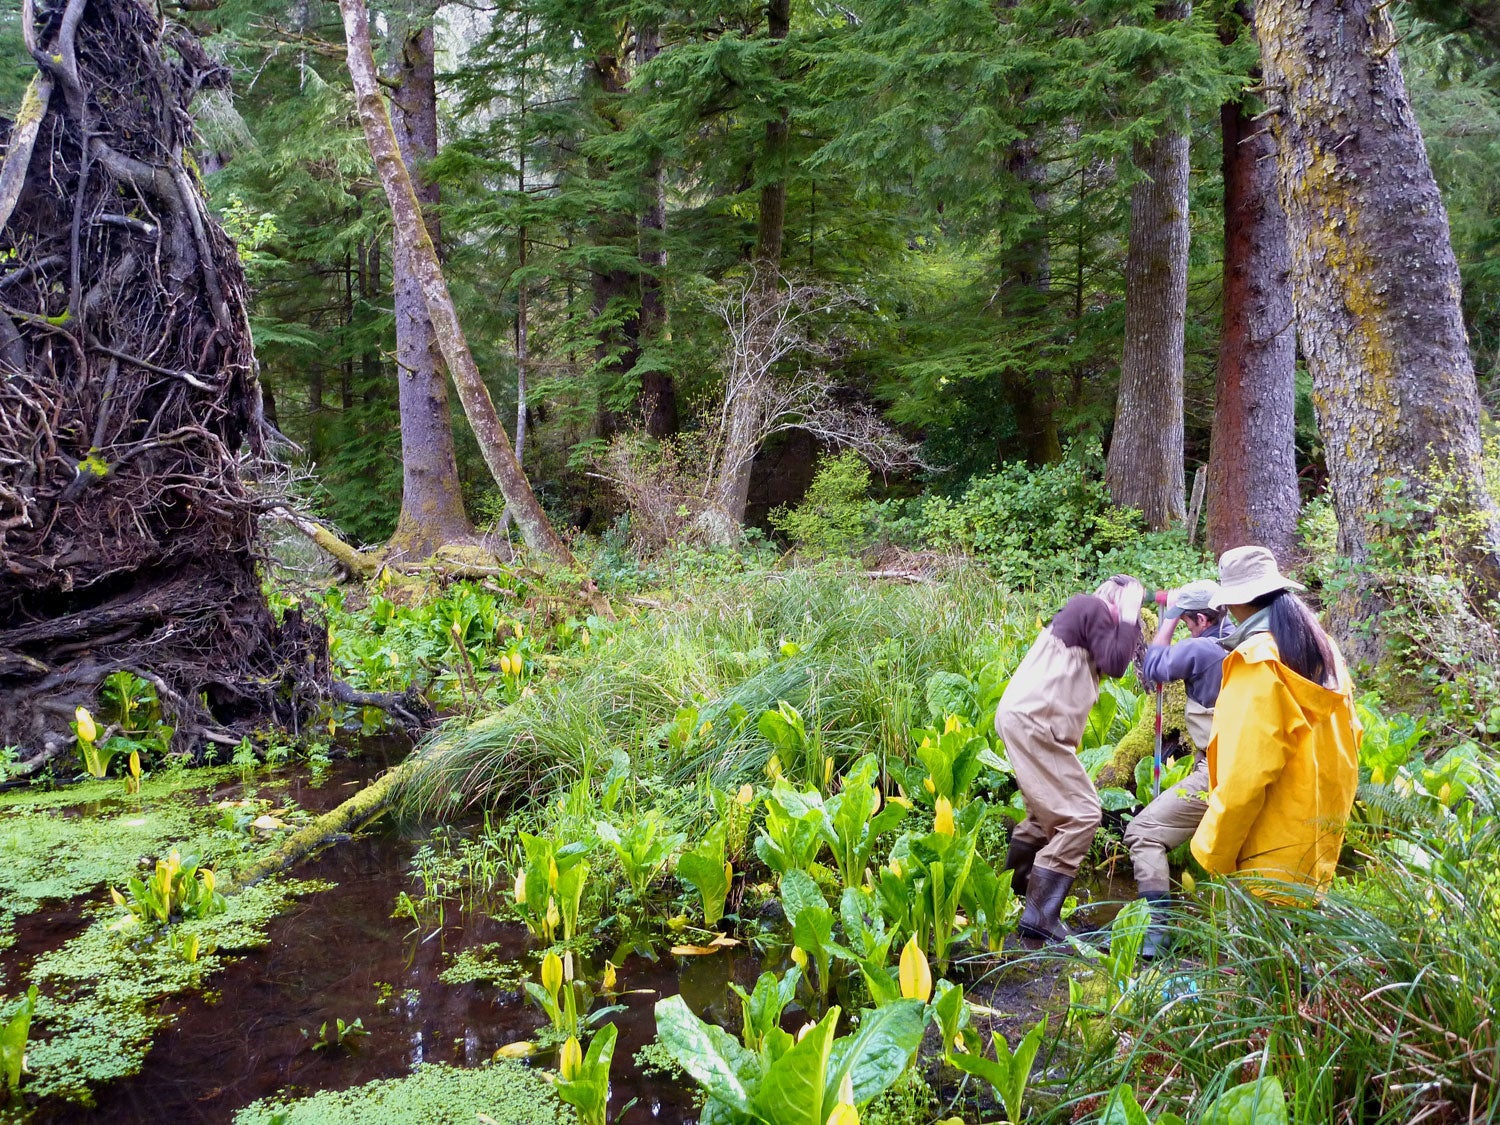 Researchers gathering data in a lush green swamp environment